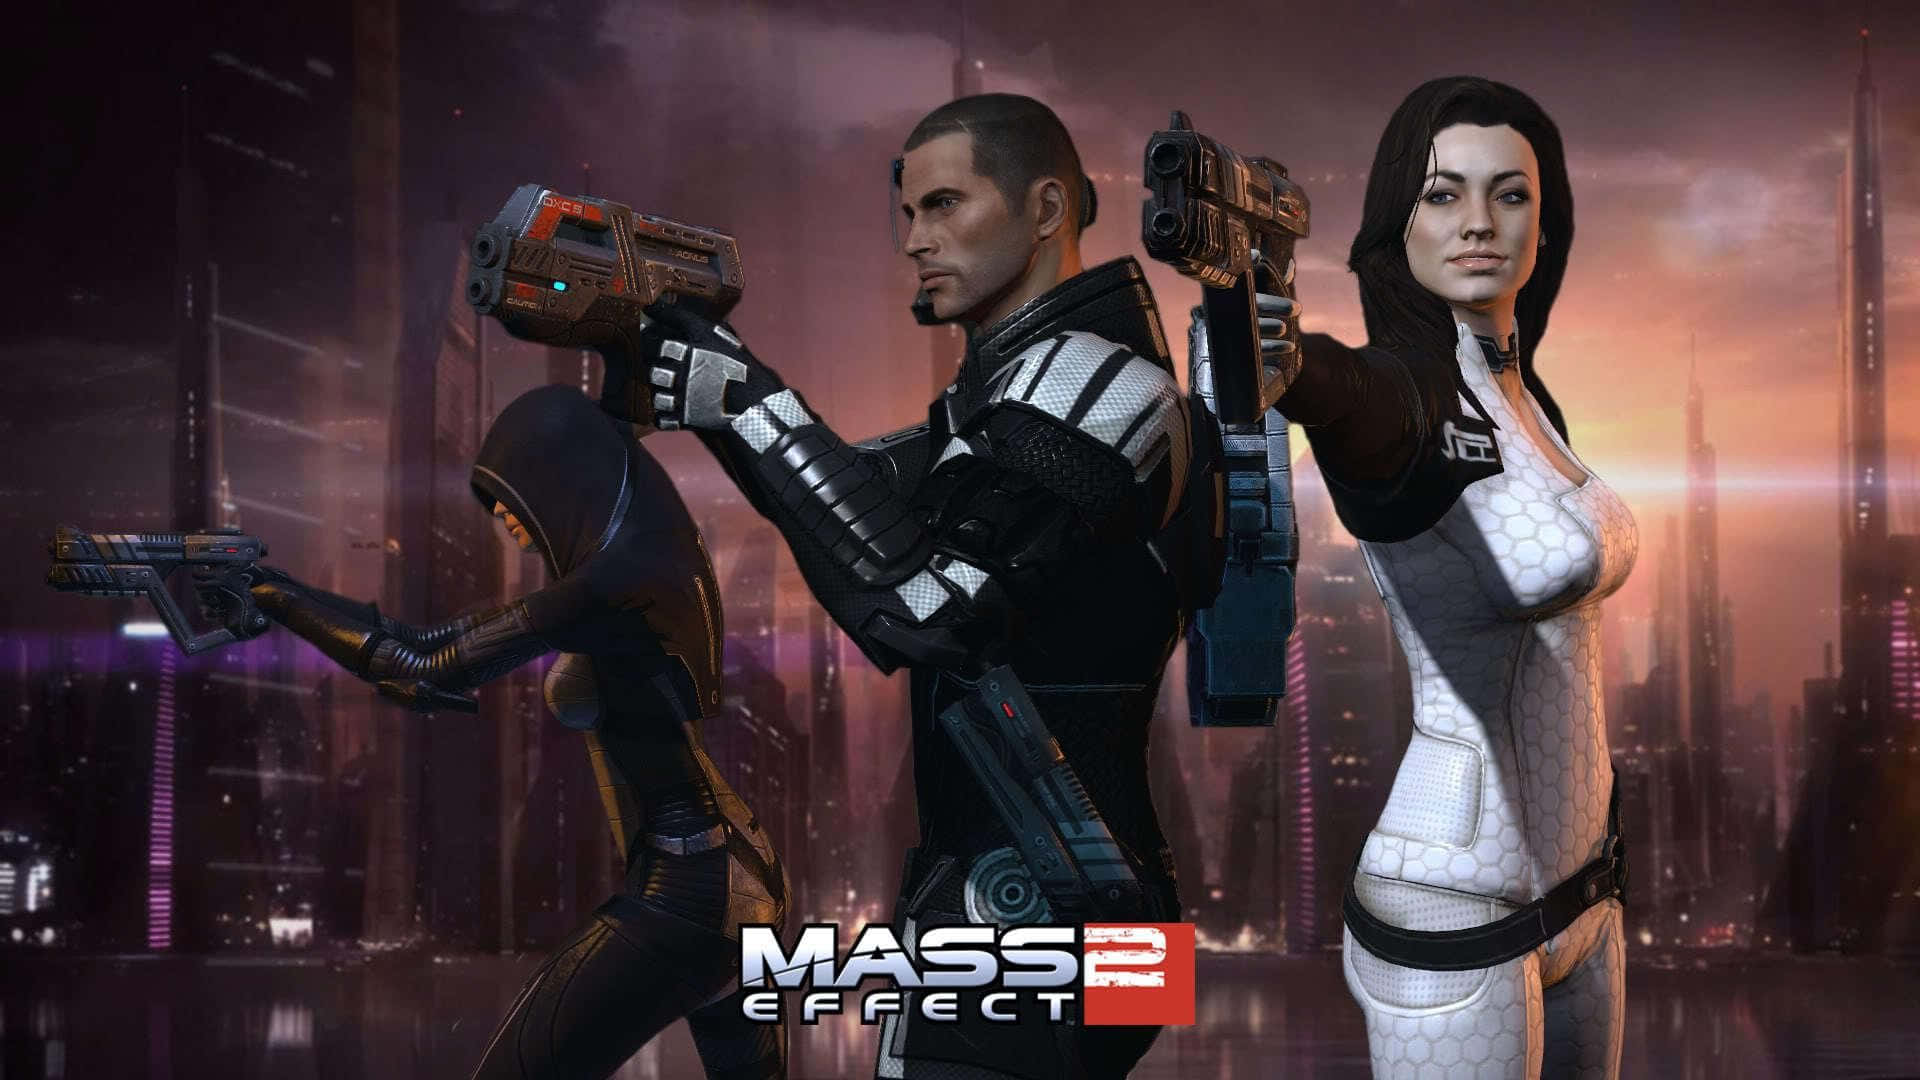 Mass Effect 2: Shepard and Crew on the Normandy Wallpaper